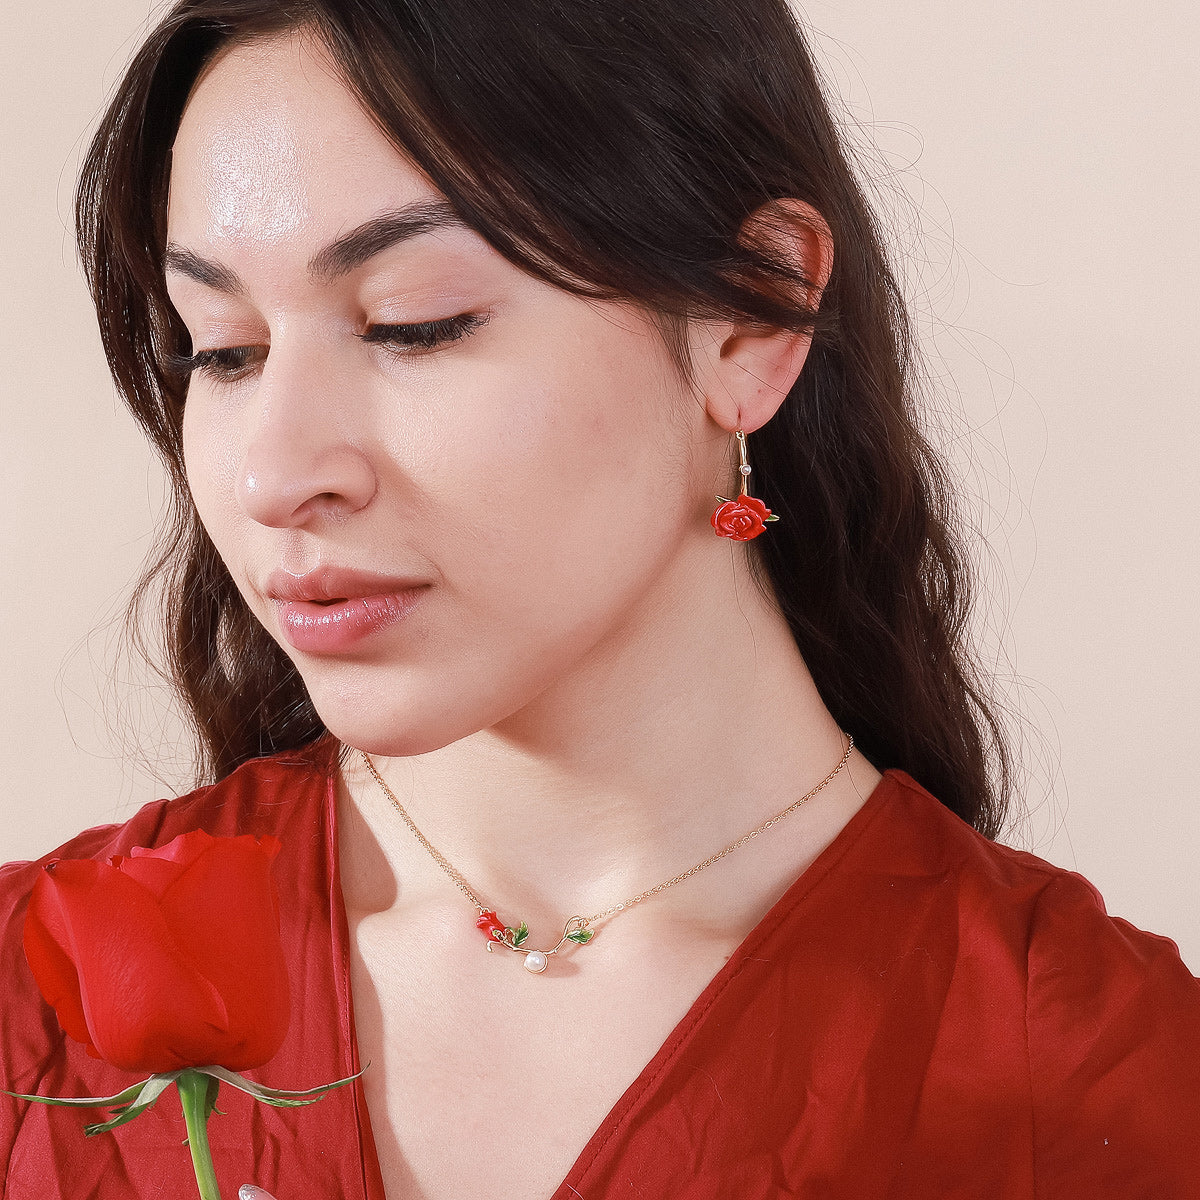 rose necklace and earrings